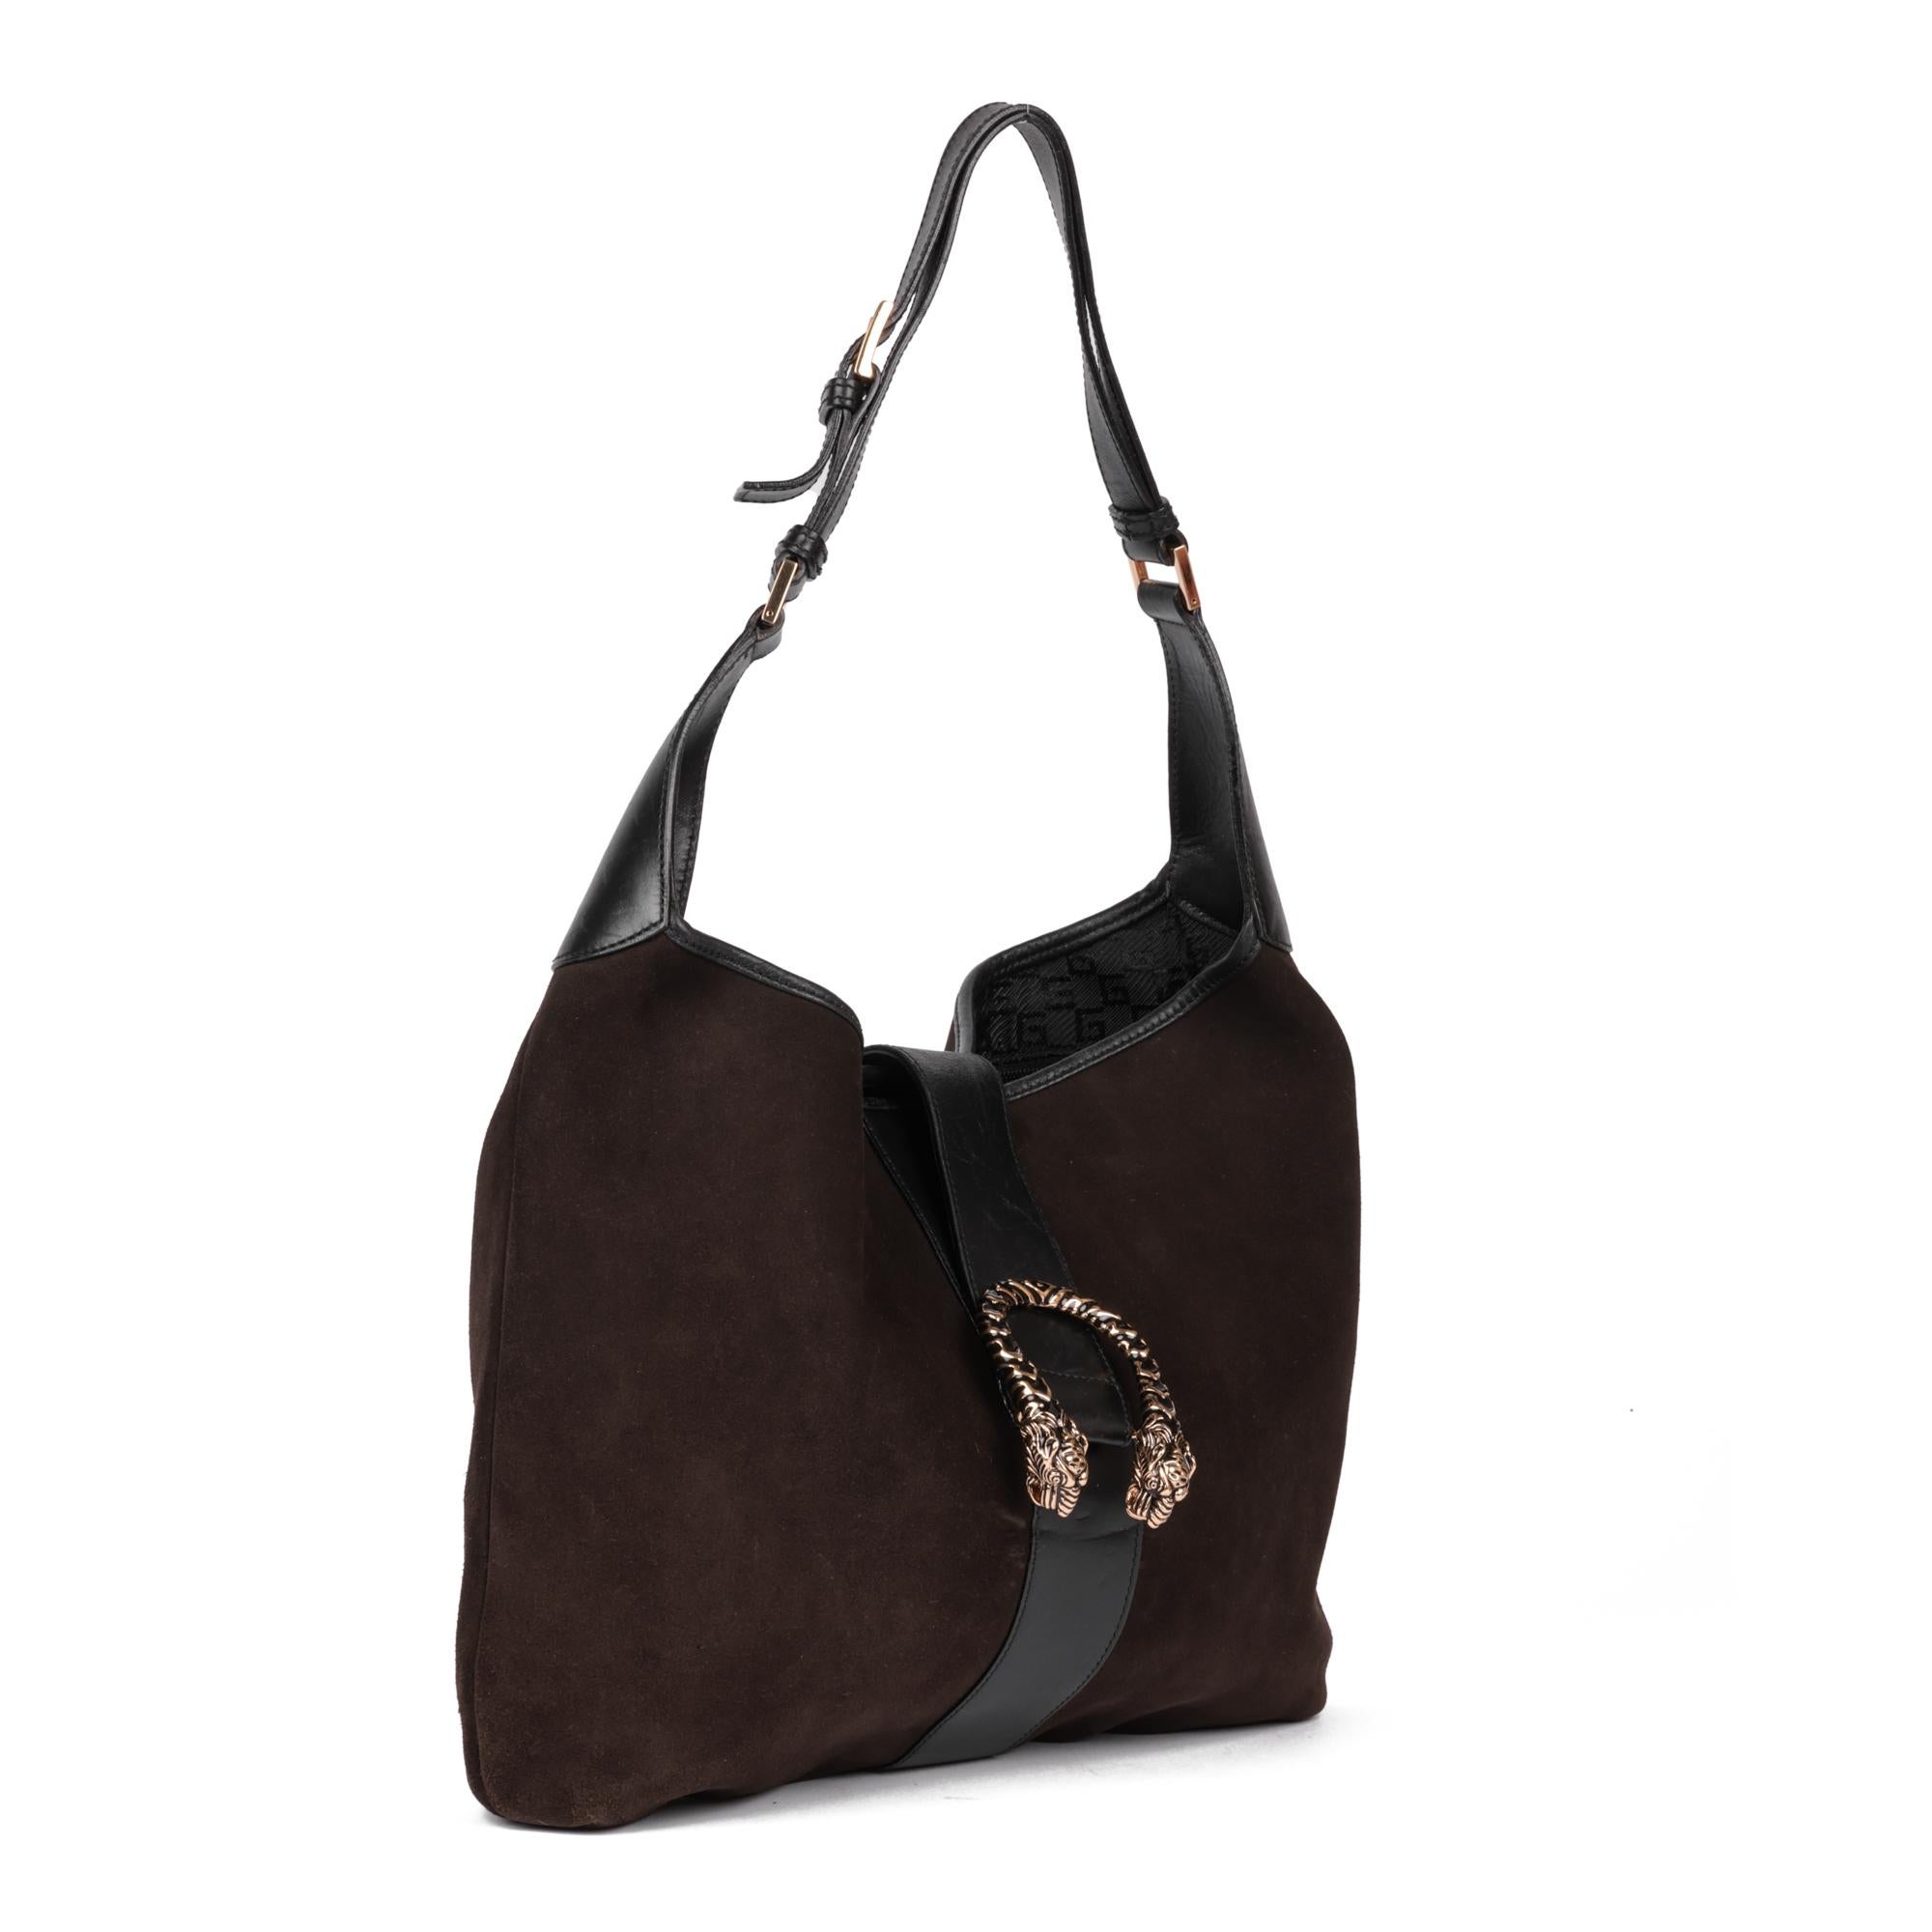 GUCCI
Brown Suede & Black Calfskin Leather Vintage Dionysus Shoulder Bag

Serial Number: 001.4067 000920
Age (Circa): 1990
Accompanied By: Gucci Dust Bag, Care Card
Authenticity Details: Date Stamp (Made in Italy)
Gender: Ladies
Type: Top Handle,